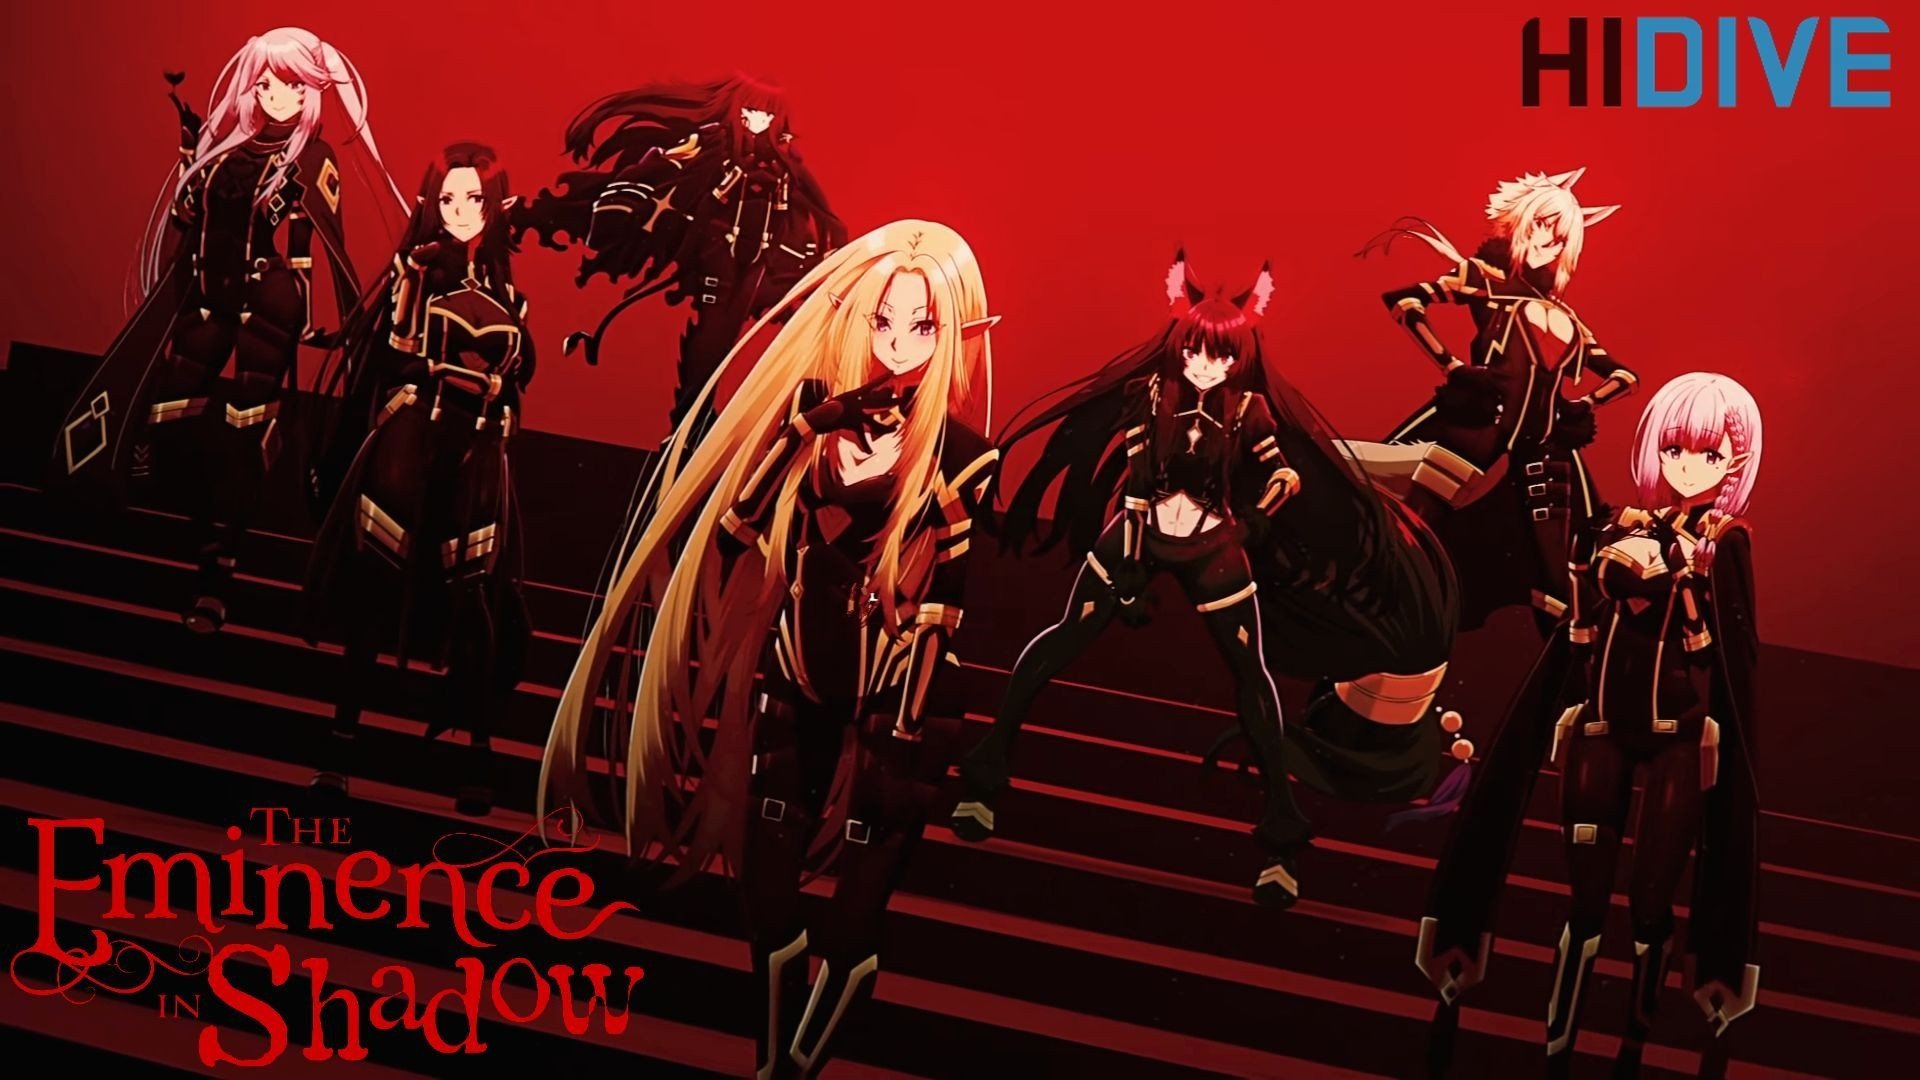 The Eminence in the Shadow will be streamed this fall of 2022 exclusively on HIDIVE